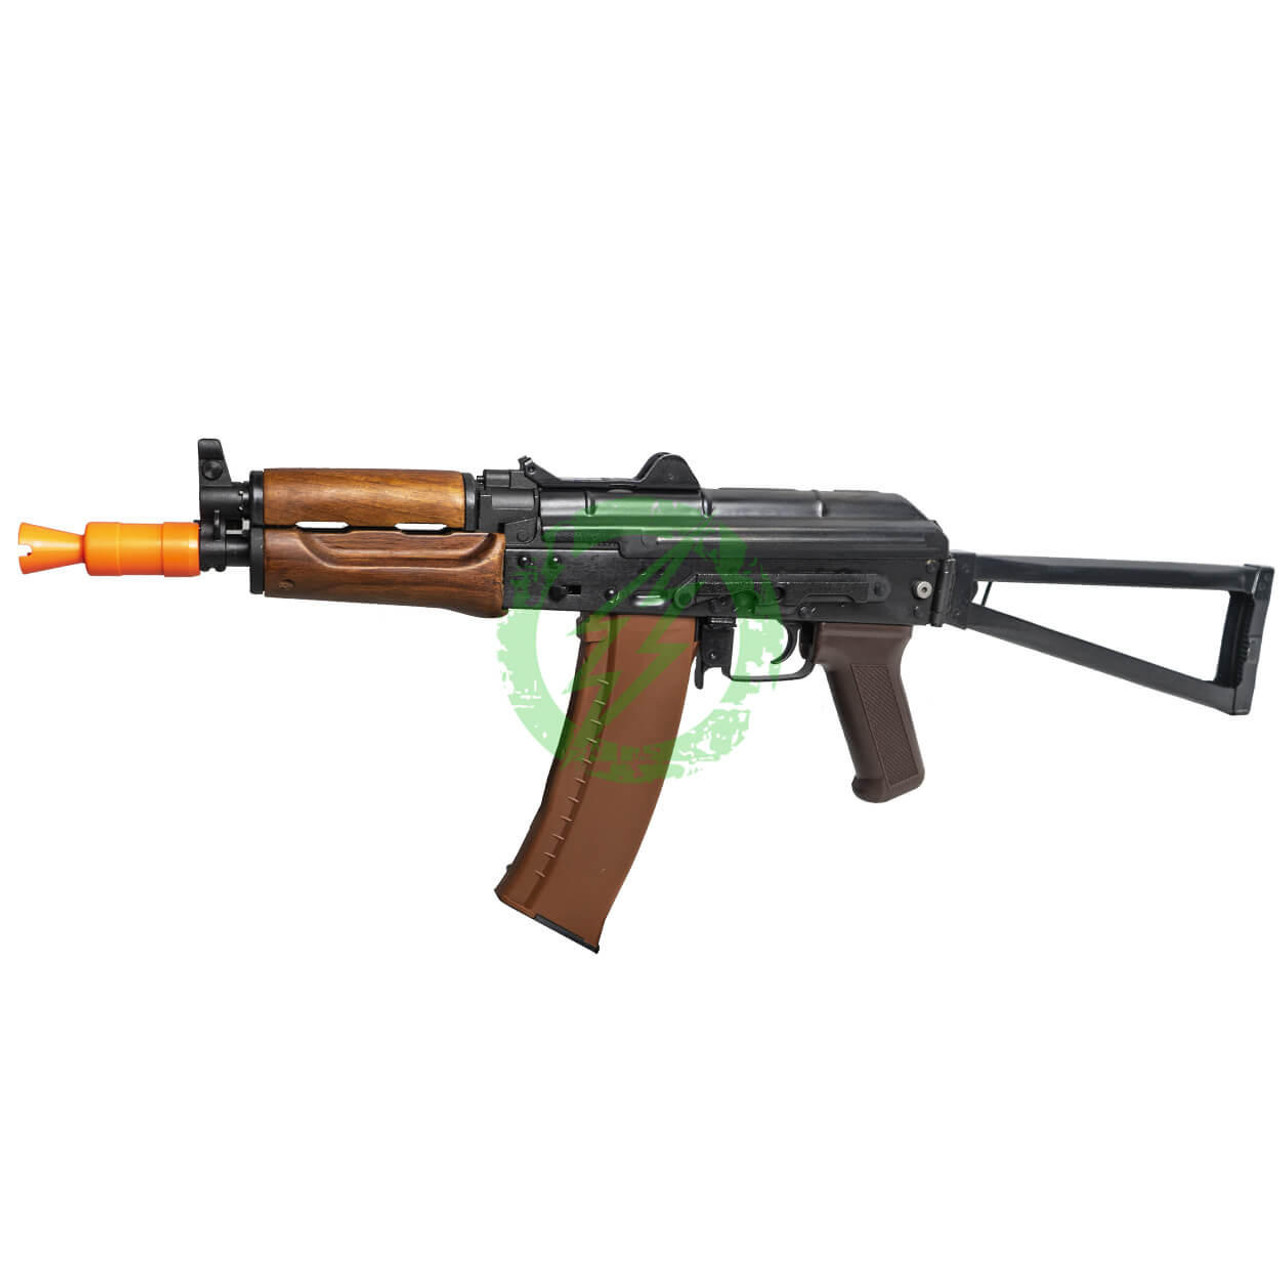  E&L Airsoft New Essential Version AKS-74UN AEG Rifle CQB Length Steel Body with Wooden Furniture 